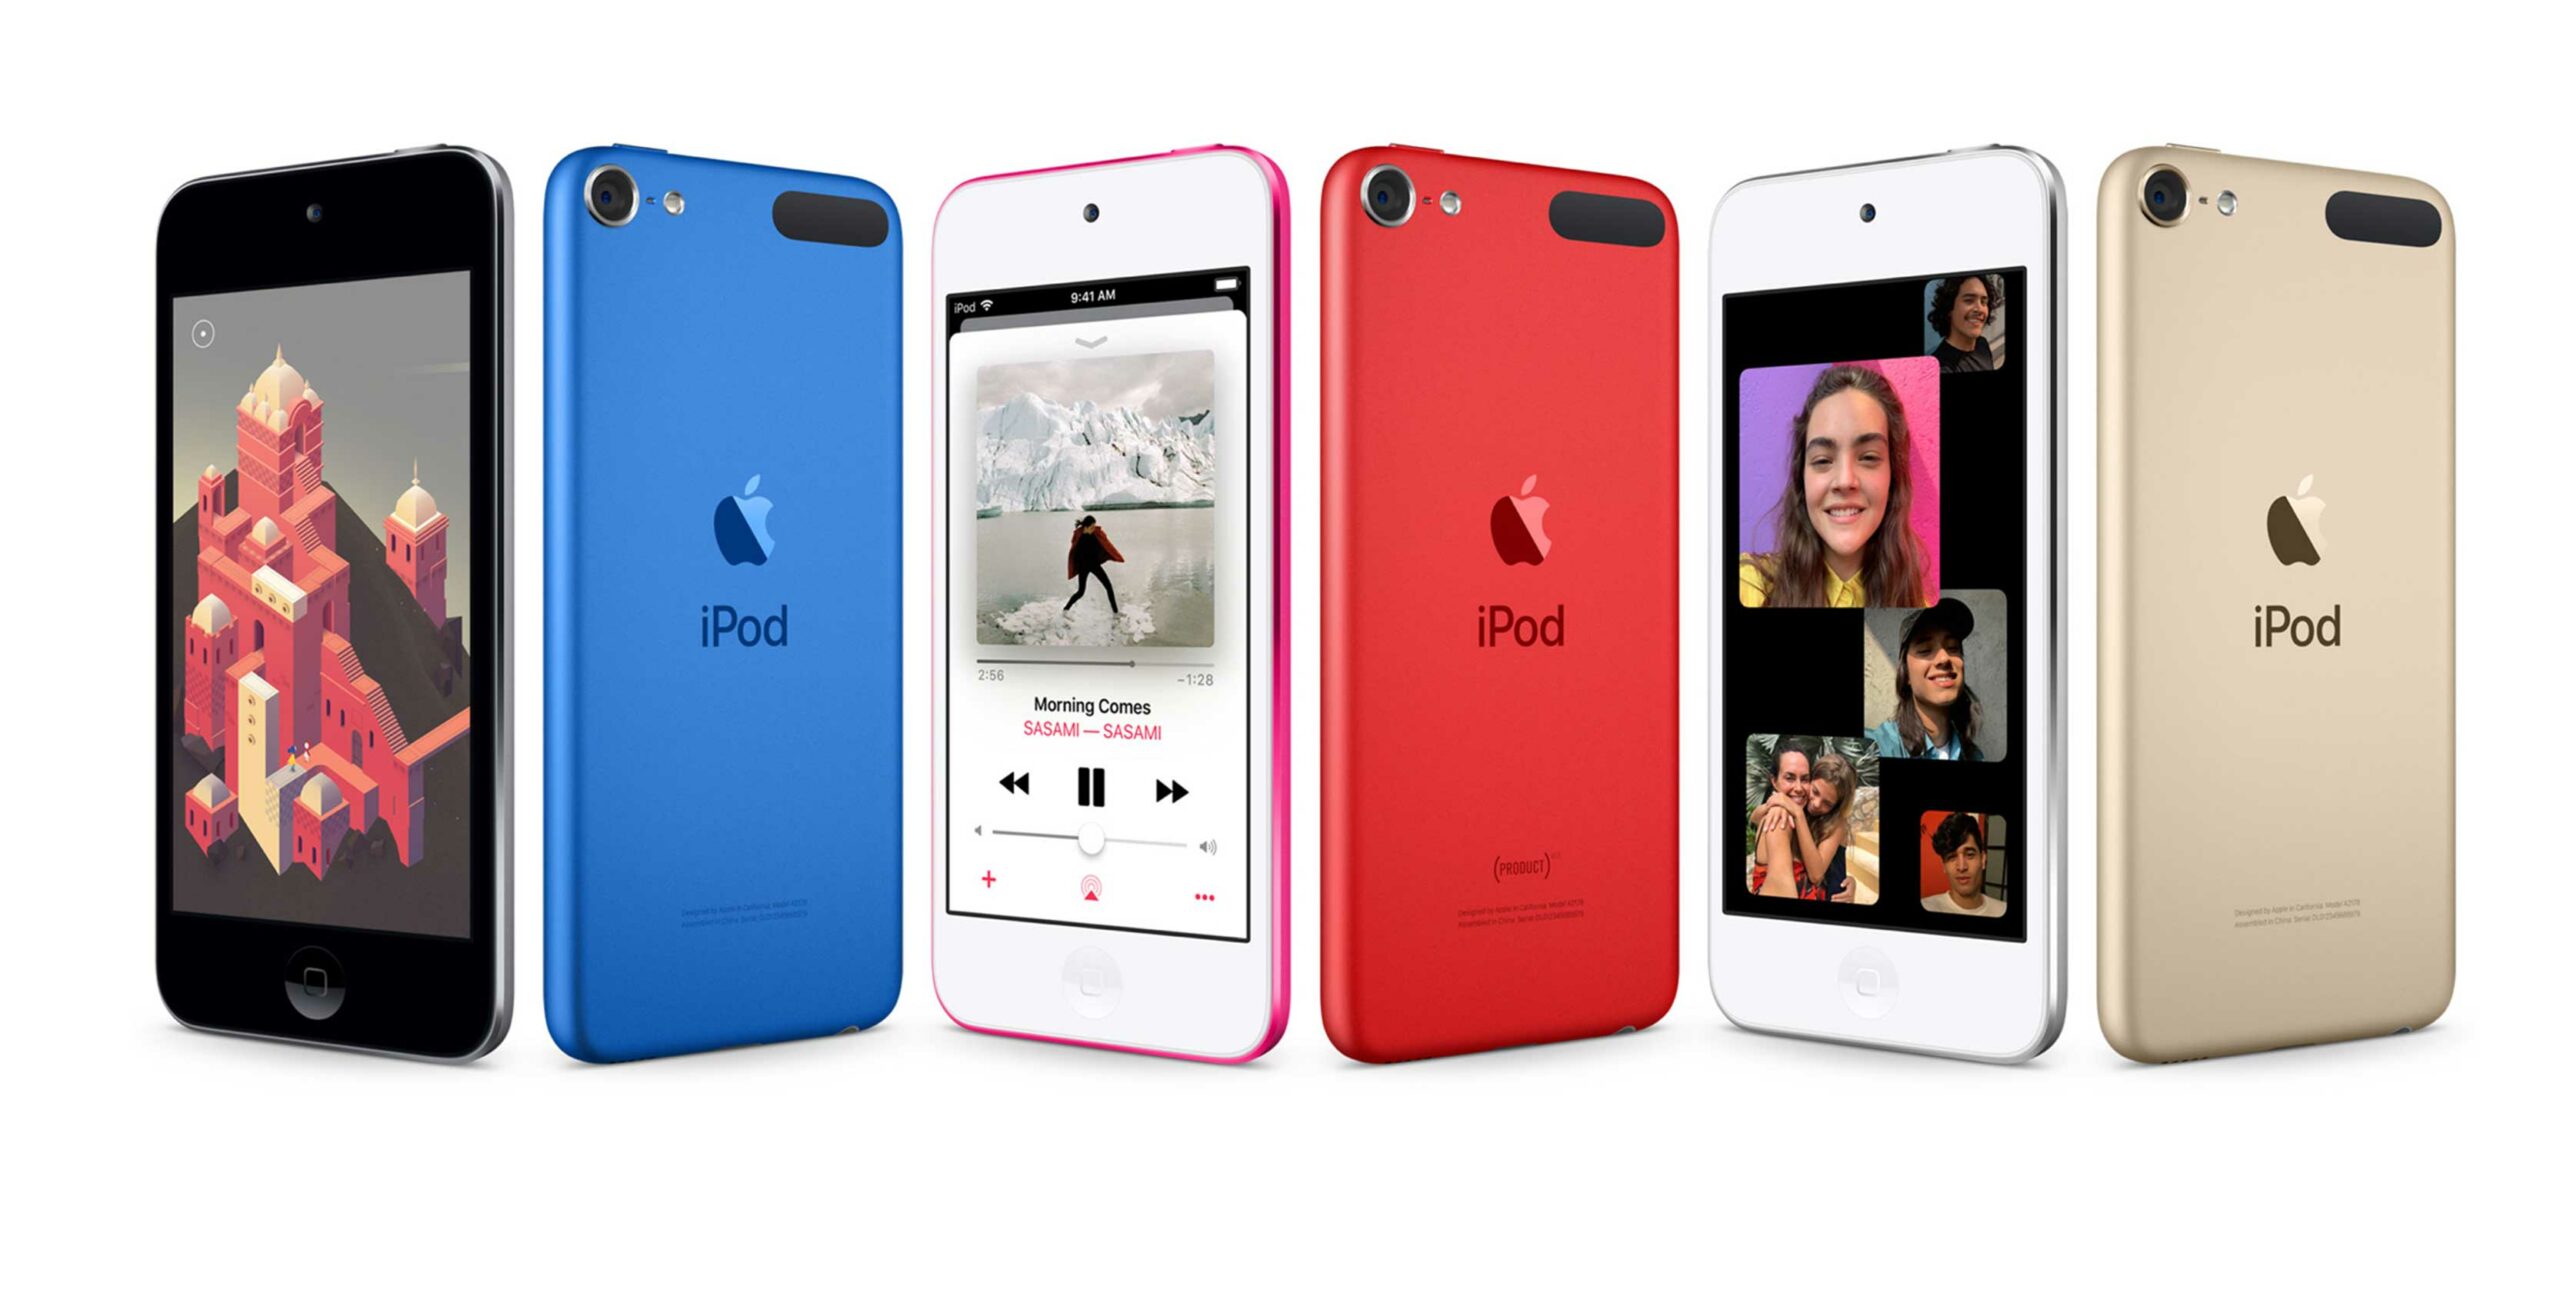 iPod Touch now sold out in Canada, following Apple’s discontinuation announcement